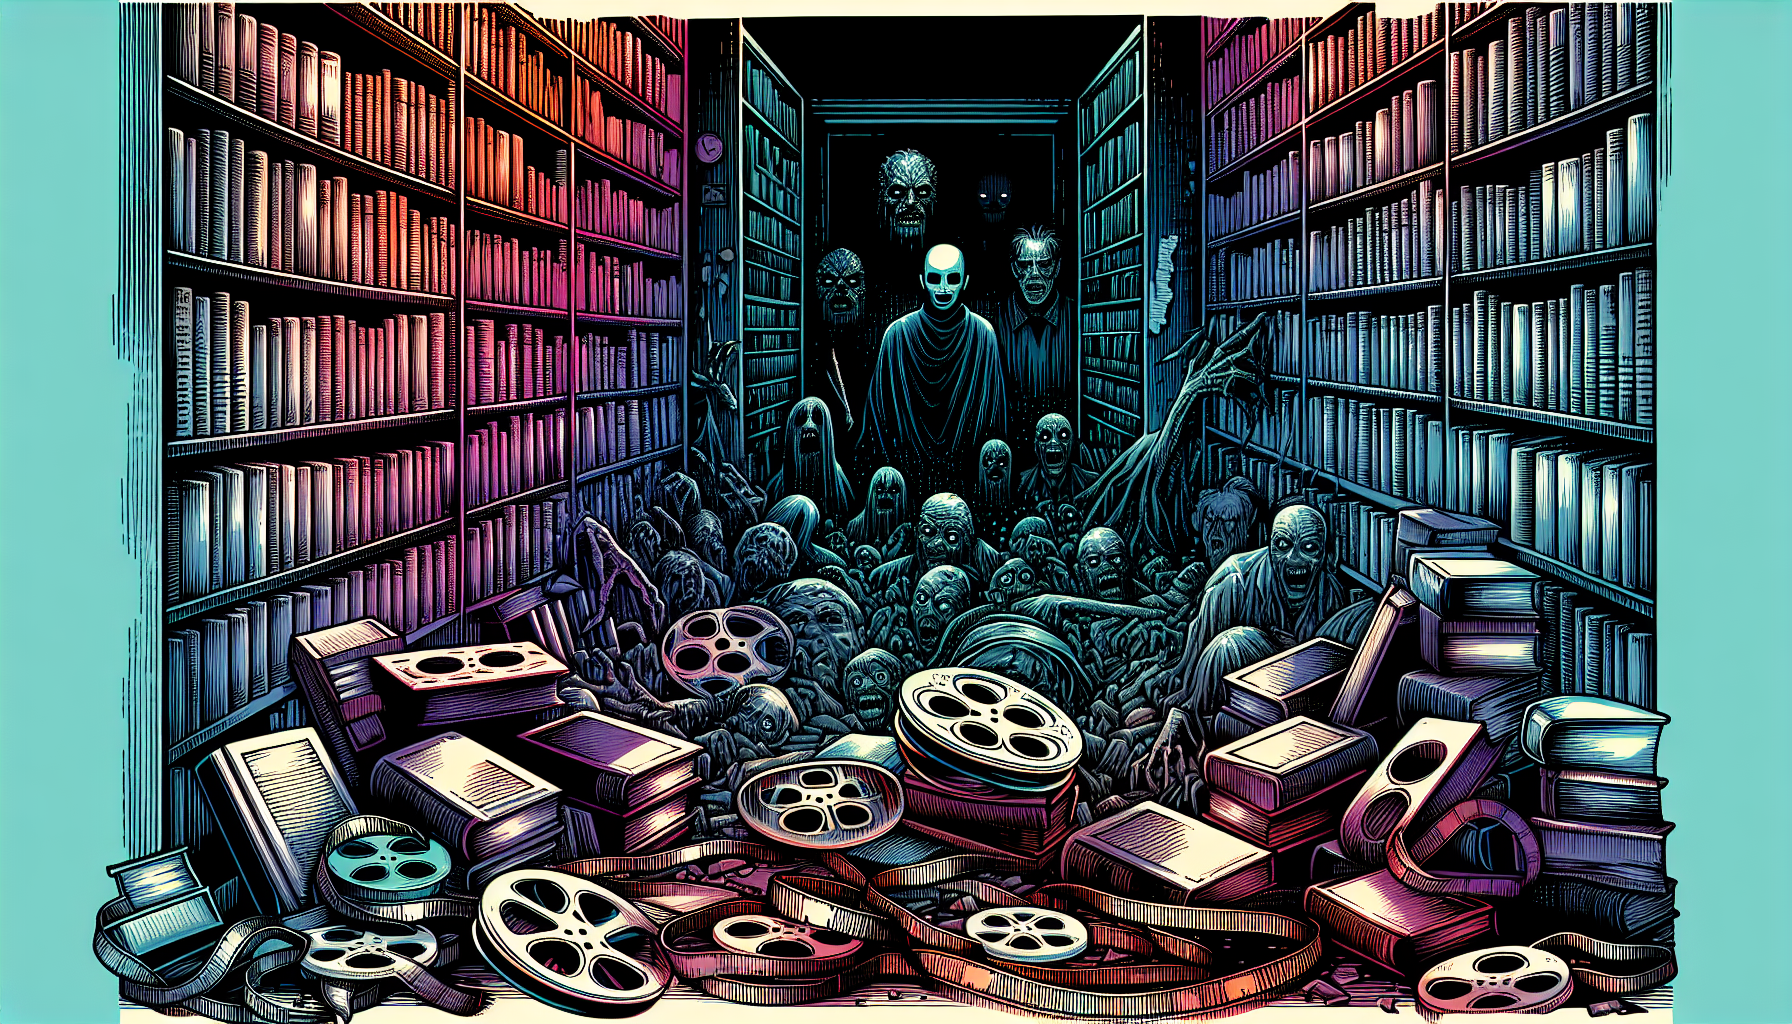 A dimly lit, eerie library filled with ancient horror film reels and books, with shadows hinting at various subgenre monsters like a ghost, vampire, and zombie lurking among the shelves.